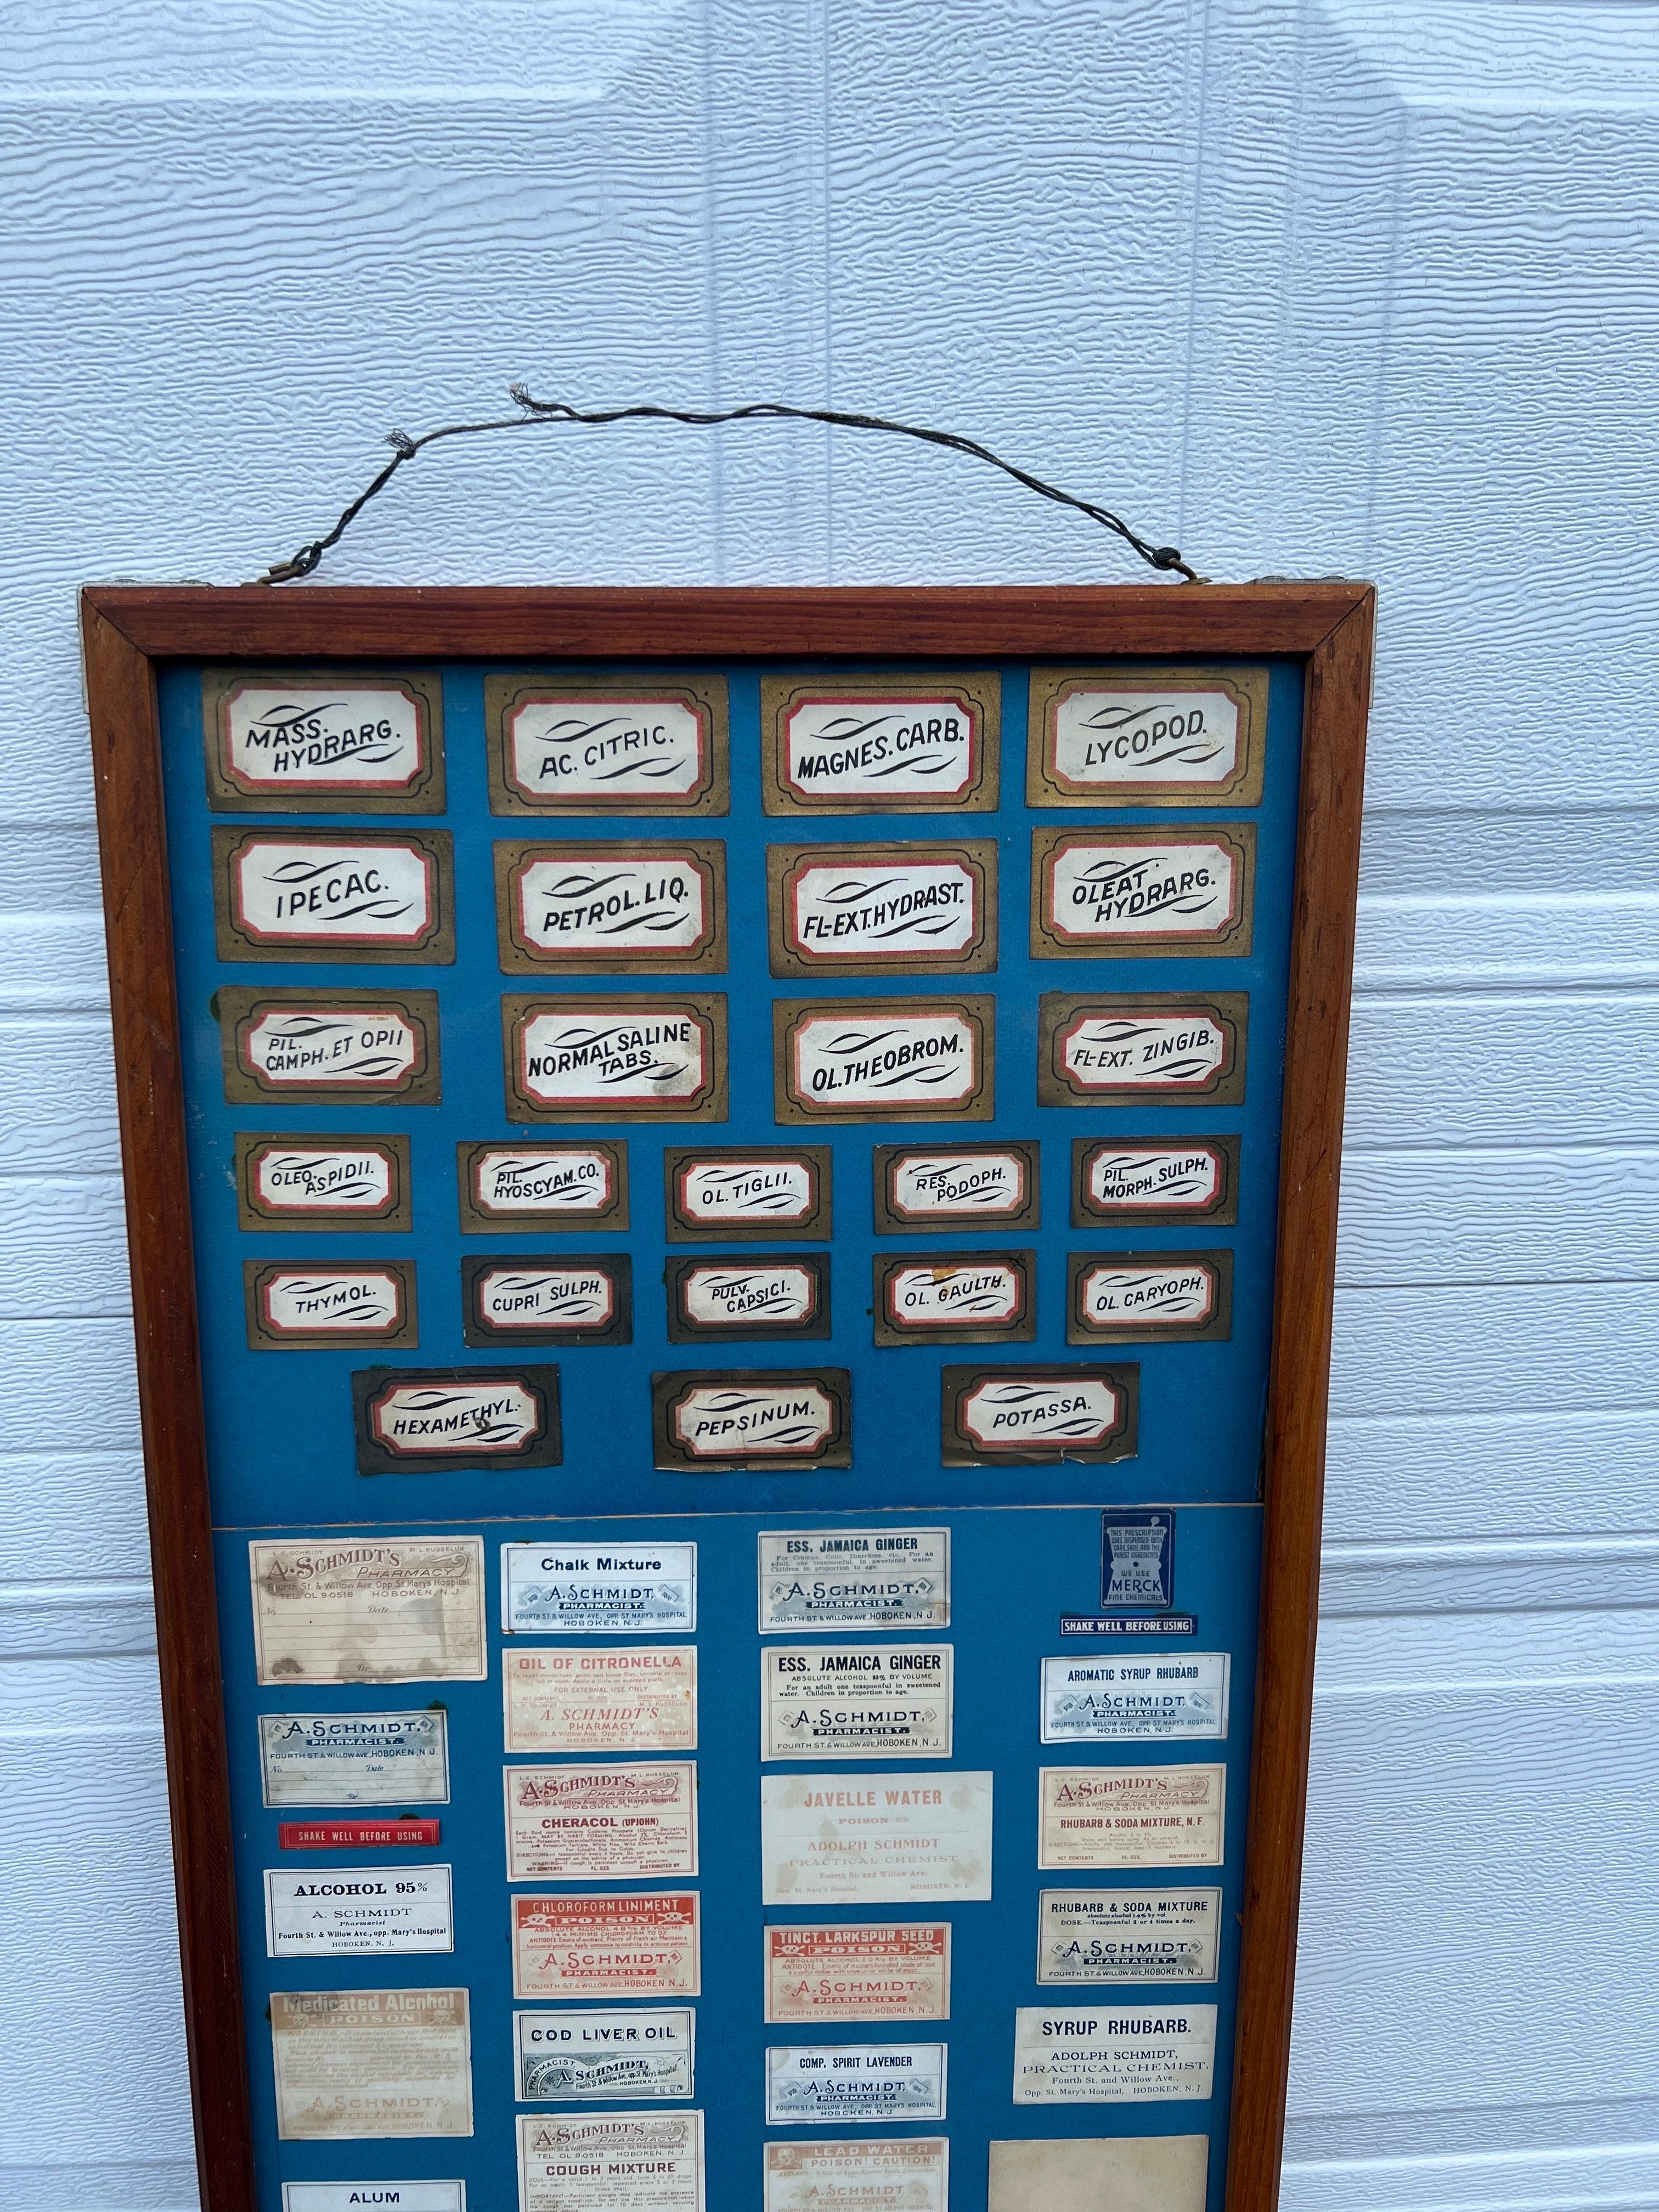 A fantastic Antique general store or pharmacy label display featuring 110 different labels from a famous 19th / 20th century pharmacy in Hoboken NJ. 
Adolph Schmidt's pharmacy was located at 267 Fourth St in Hoboken across from St. Mary's Hospital